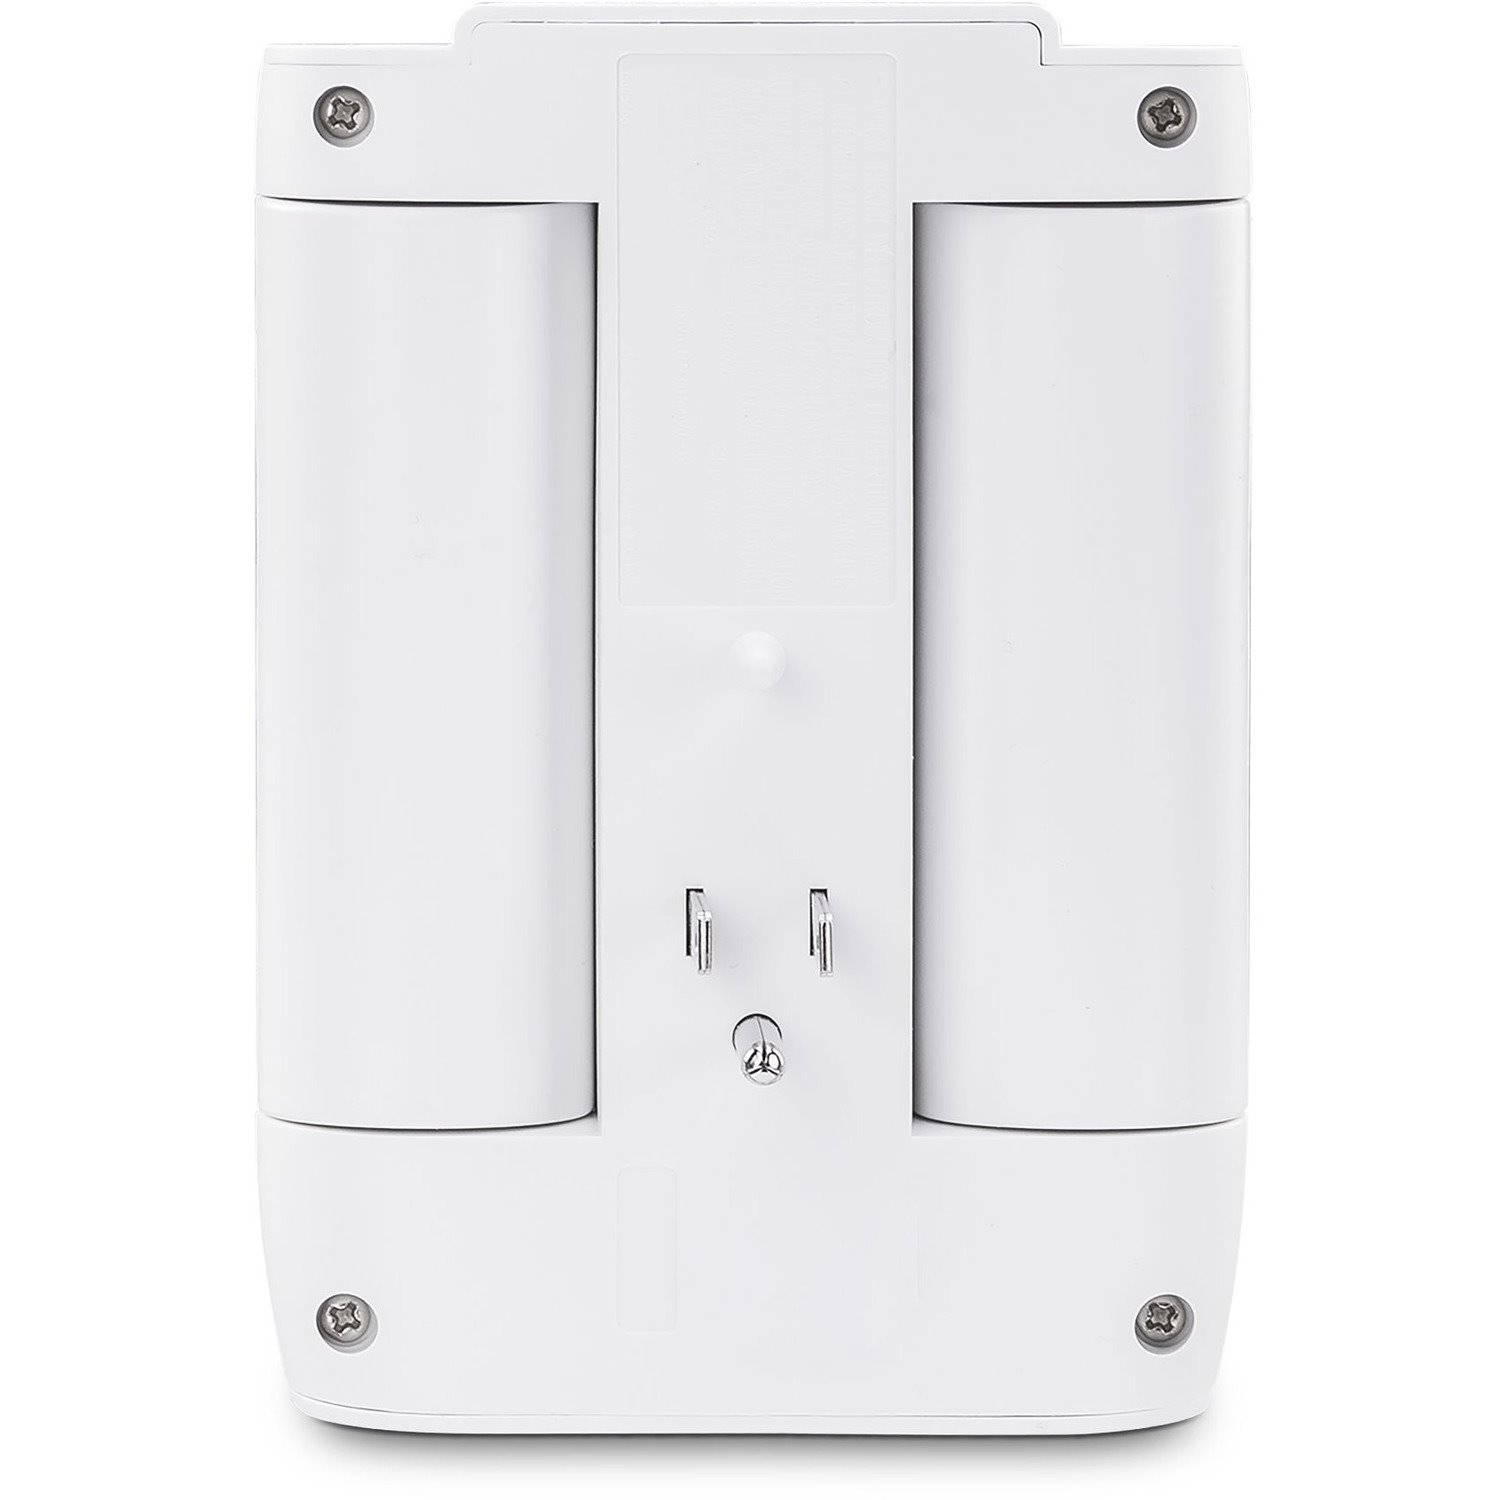 CyberPower CSB600WS Essential 6 - Outlet Surge with 900 J